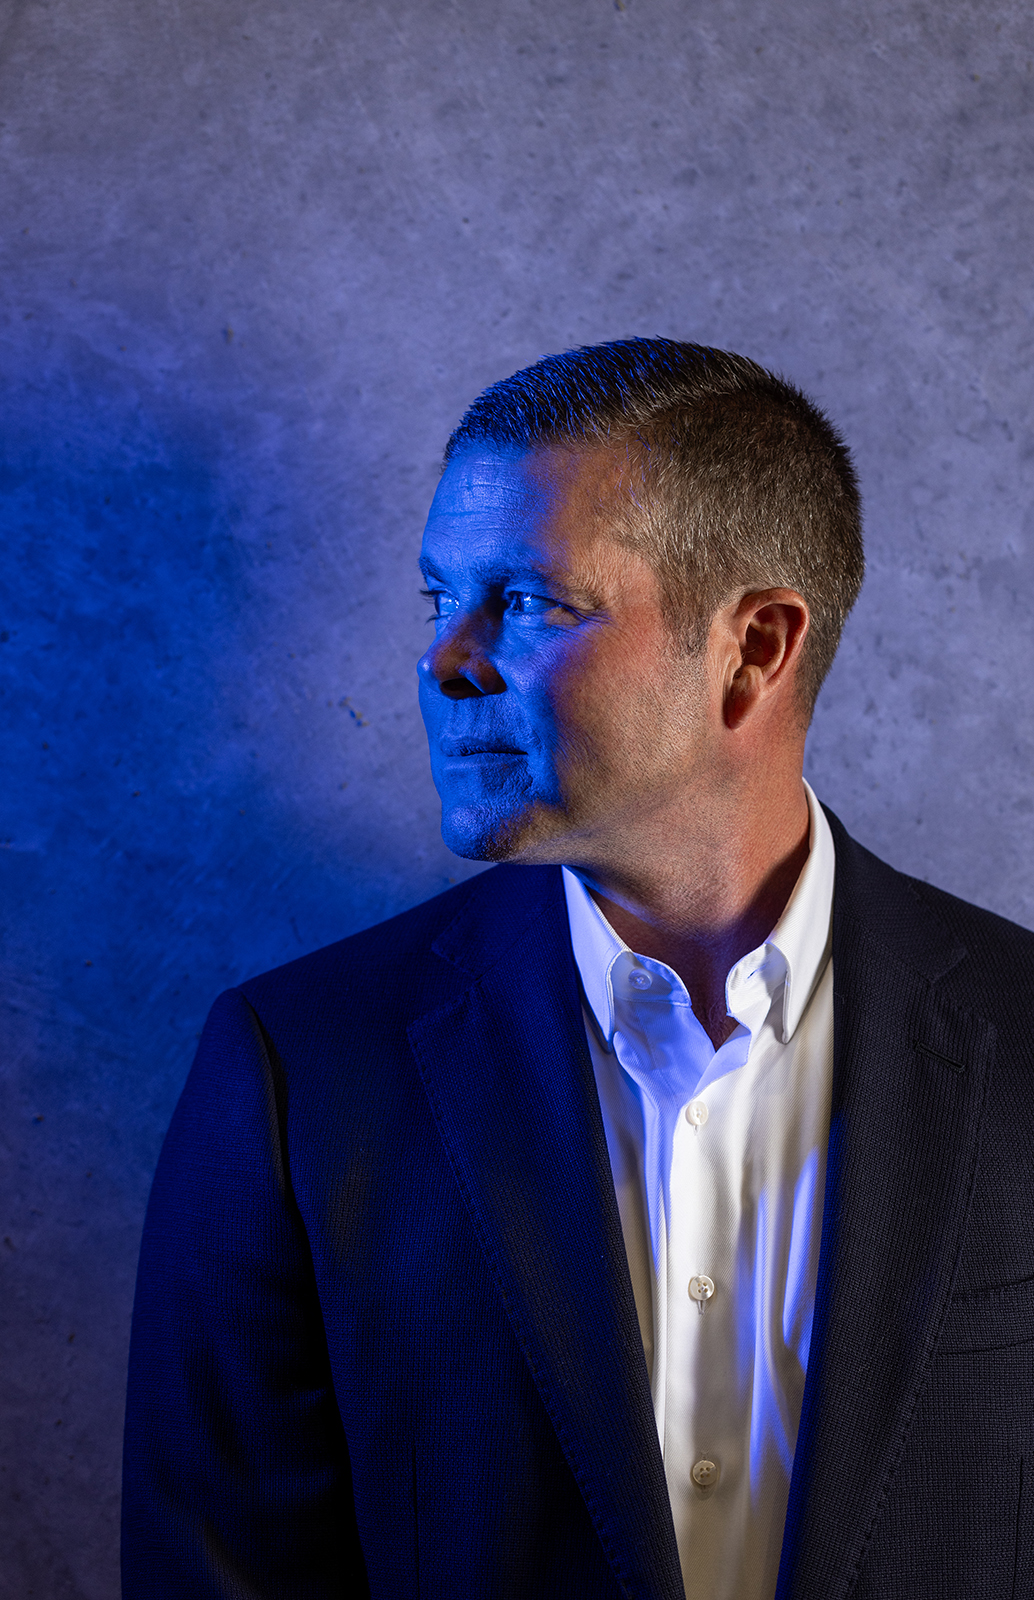 In a creative portrait, John David Rainey stands near a concrete wall in a Walmart Supercenter and has a blue light on his face.